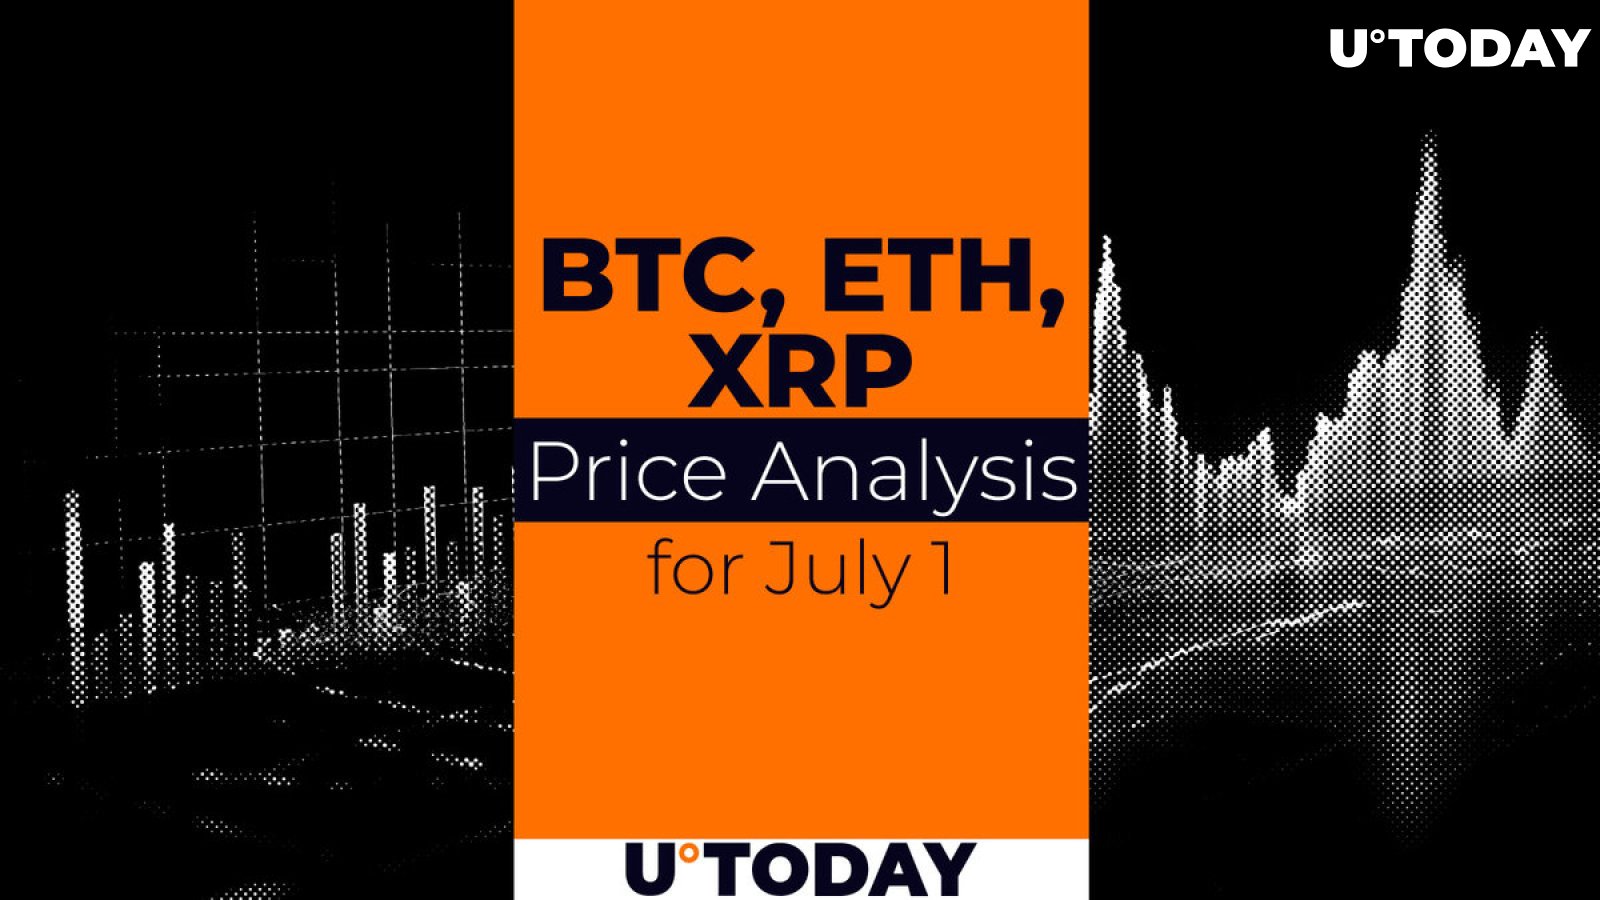 BTC, ETH and XRP Price Prediction for July 1